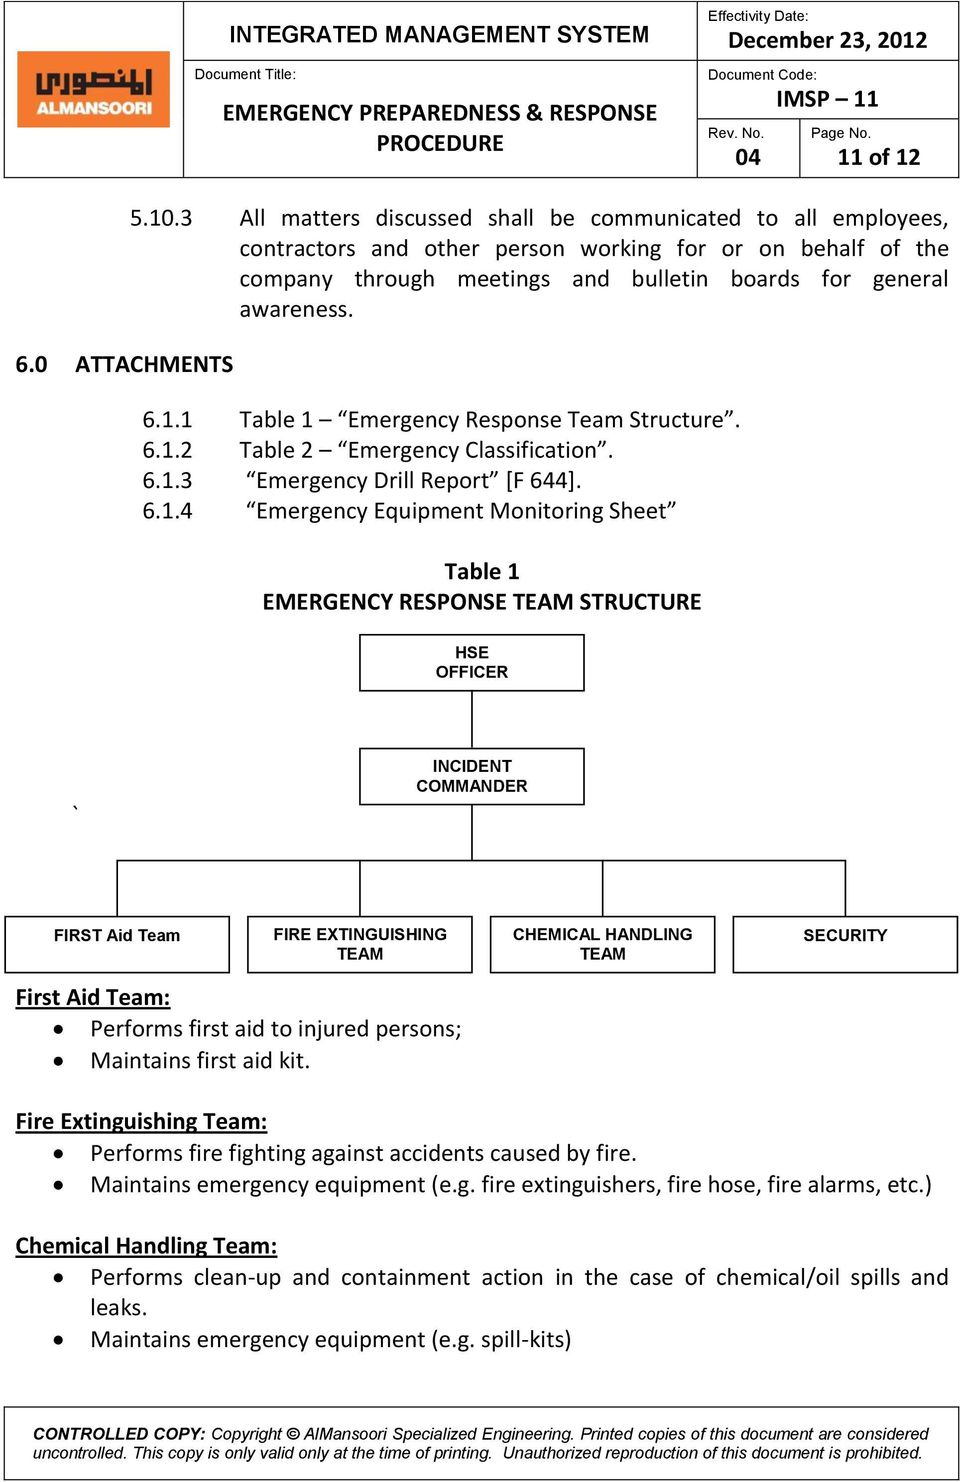 1 Table 1 Emergency Response Team Structure. 6.1.2 Table 2 Emergency Classification. 6.1.3 Emergency Drill Report [F 644]. 6.1.4 Emergency Equipment Monitoring Sheet Table 1 EMERGENCY RESPONSE TEAM